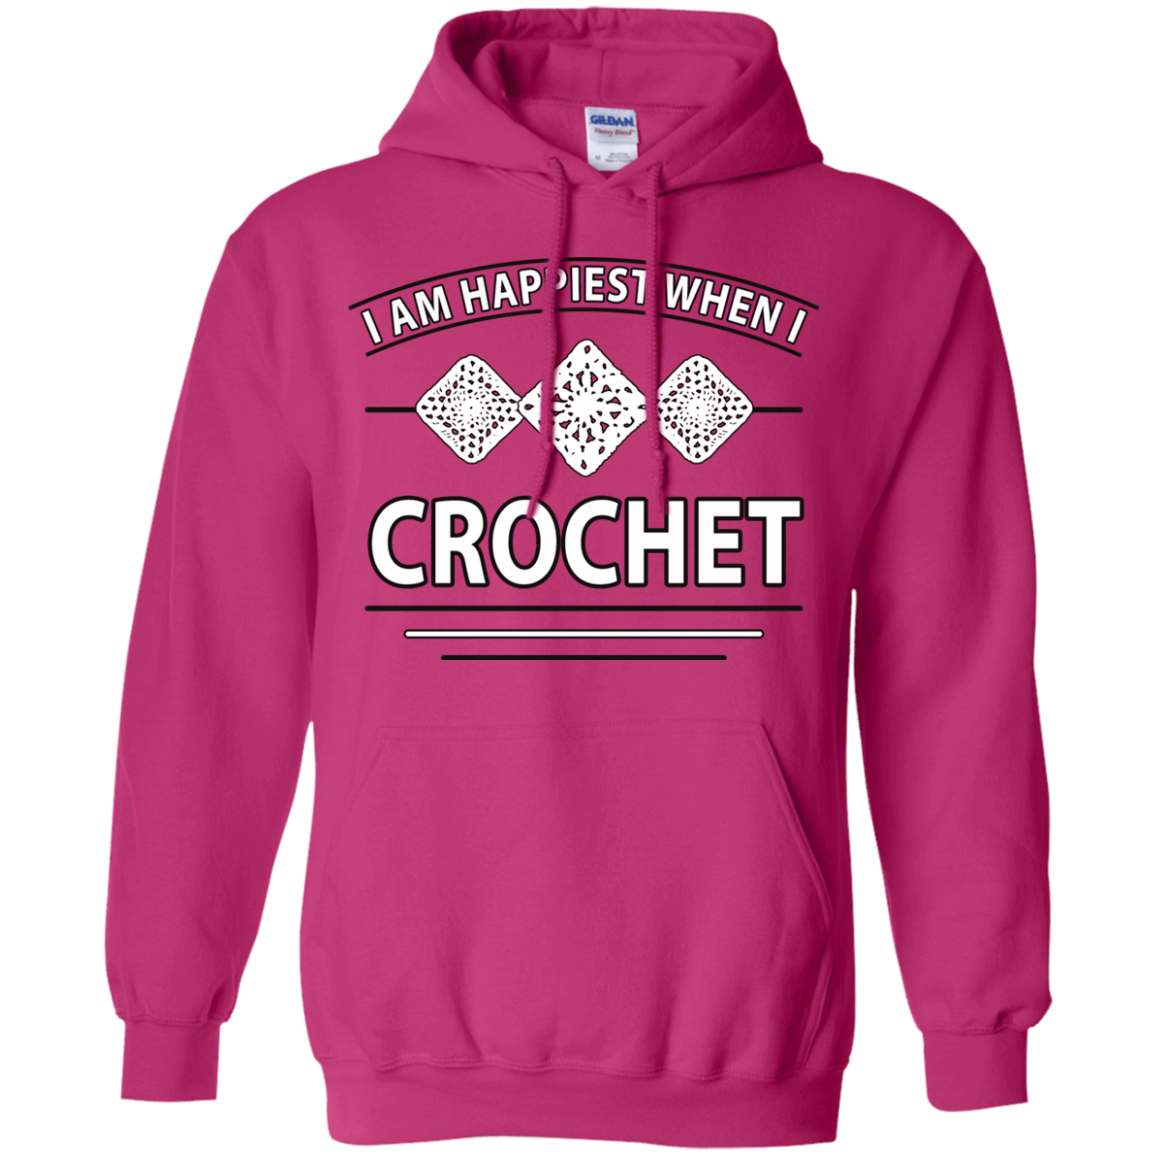 I Am Happiest When I Crochet Pullover Hoodies - Crafter4Life - 8